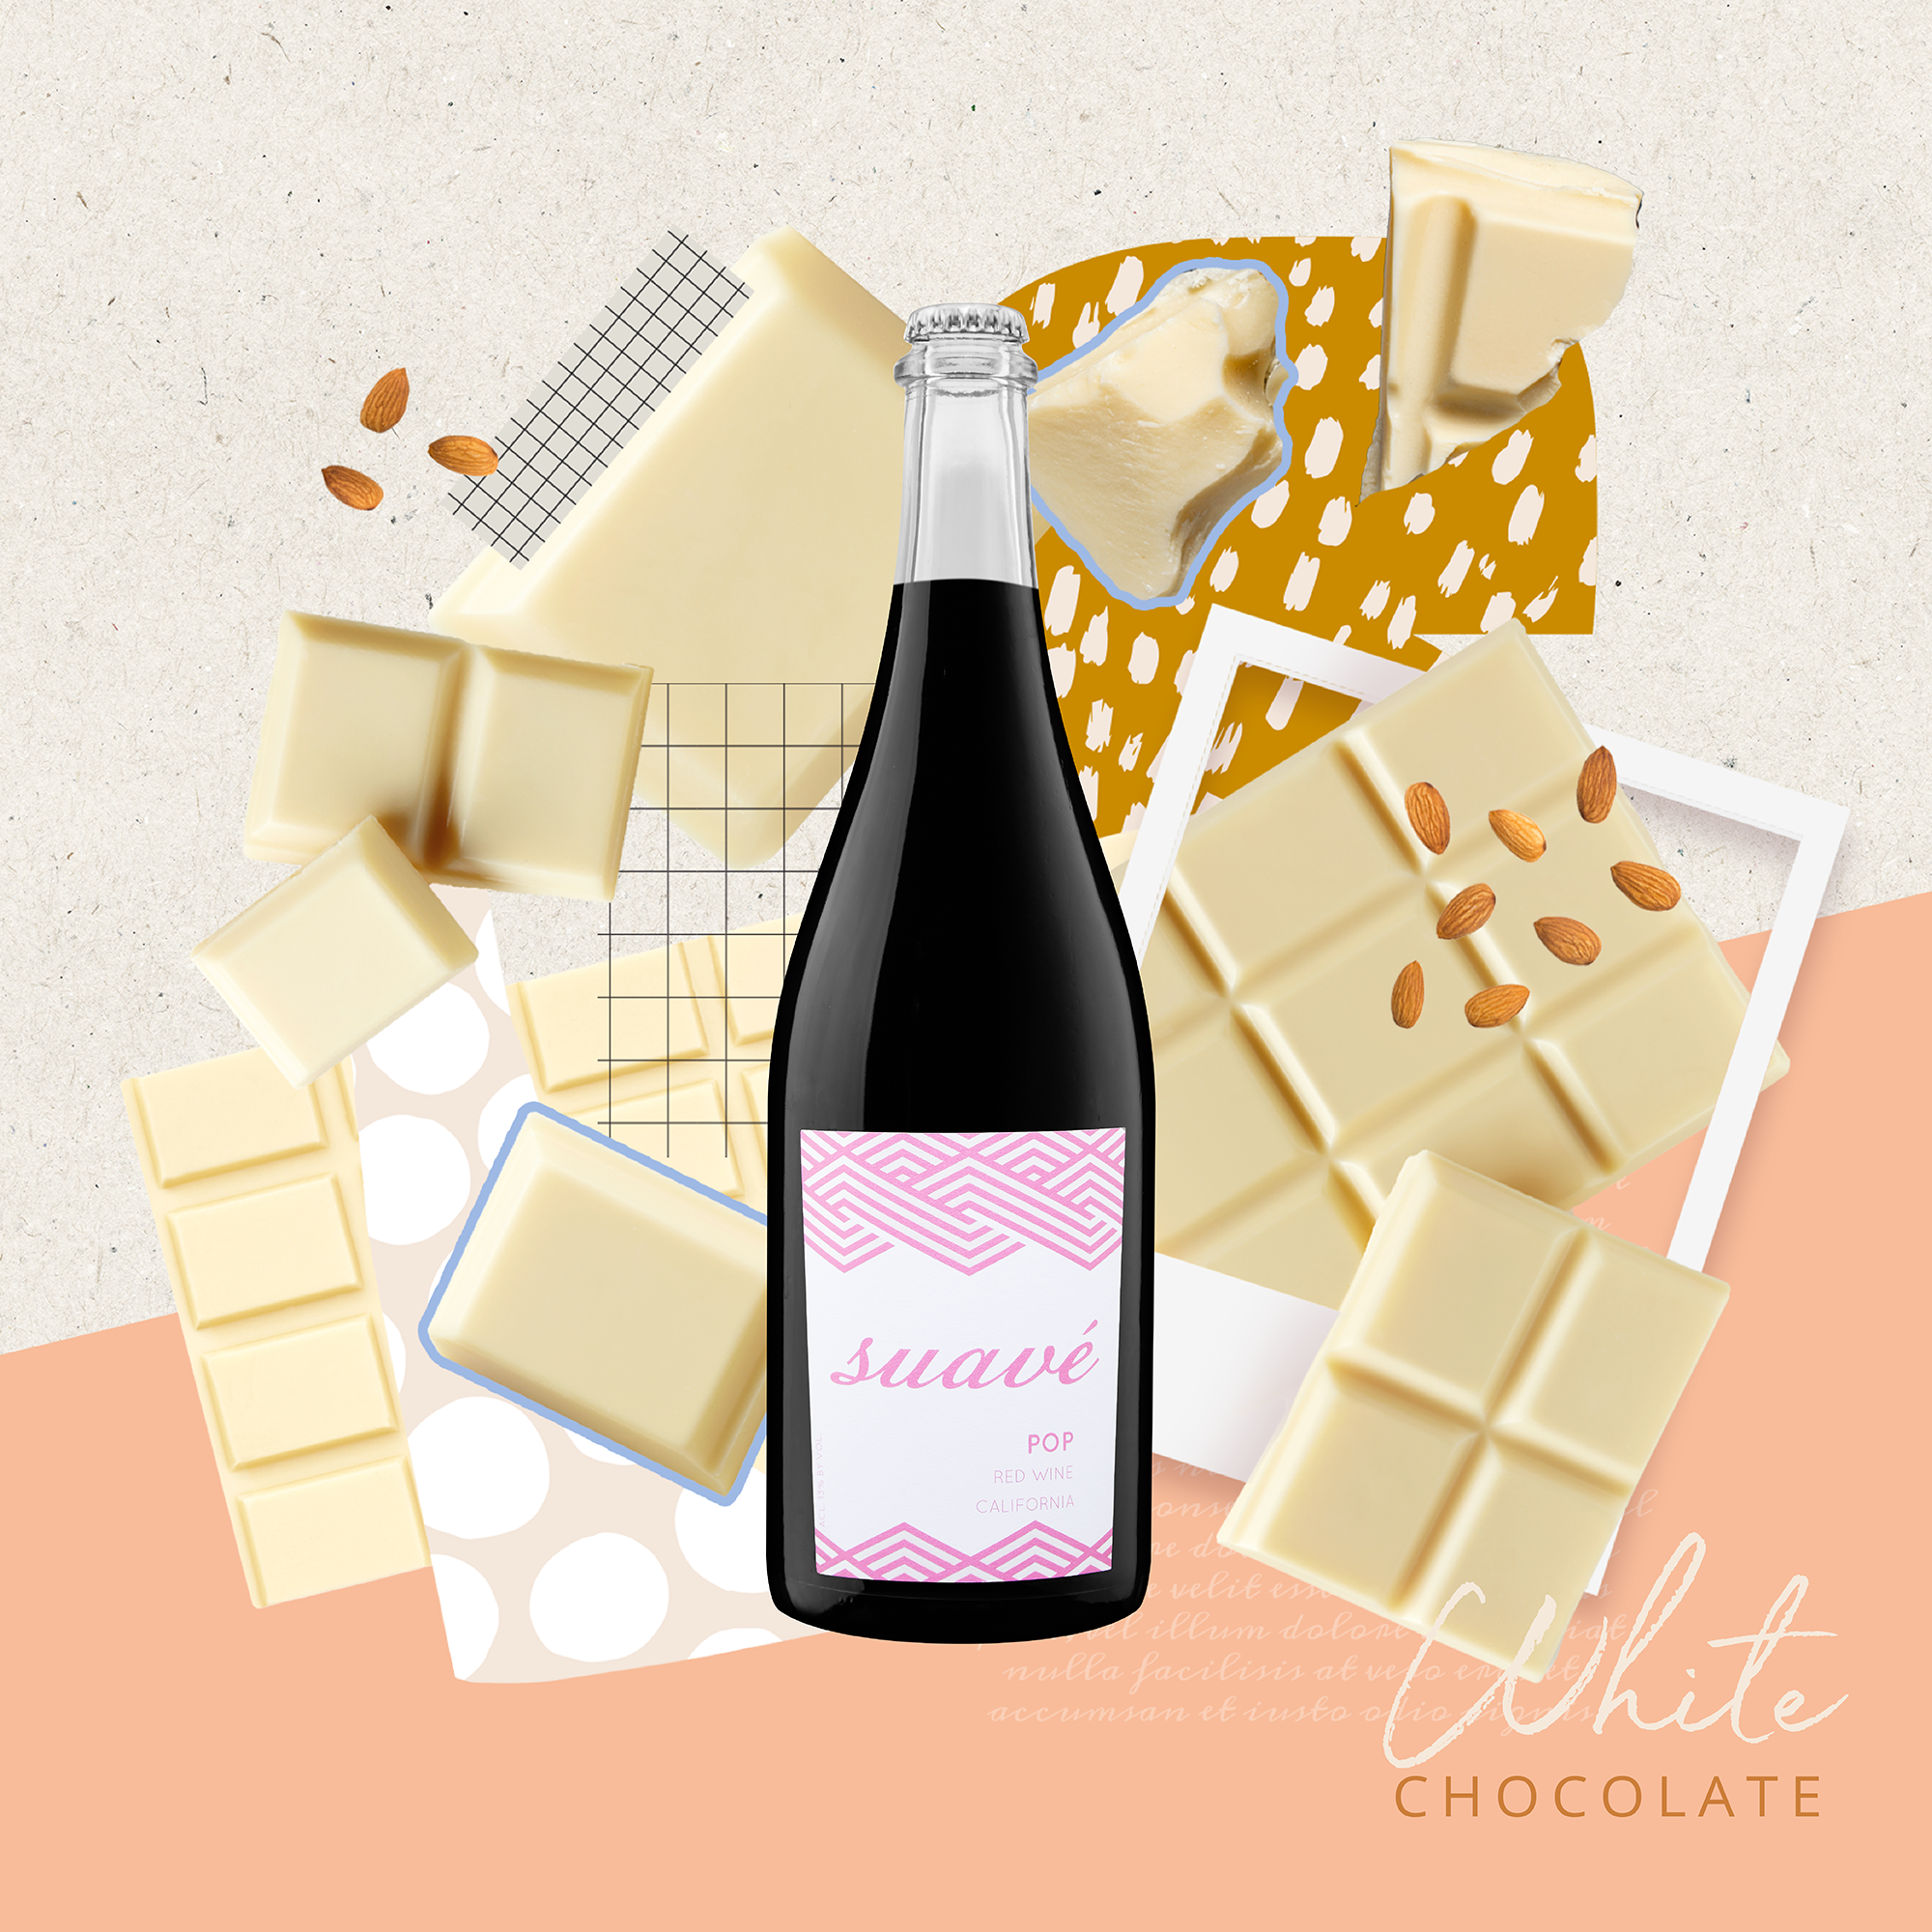 White chocolate and wine collage